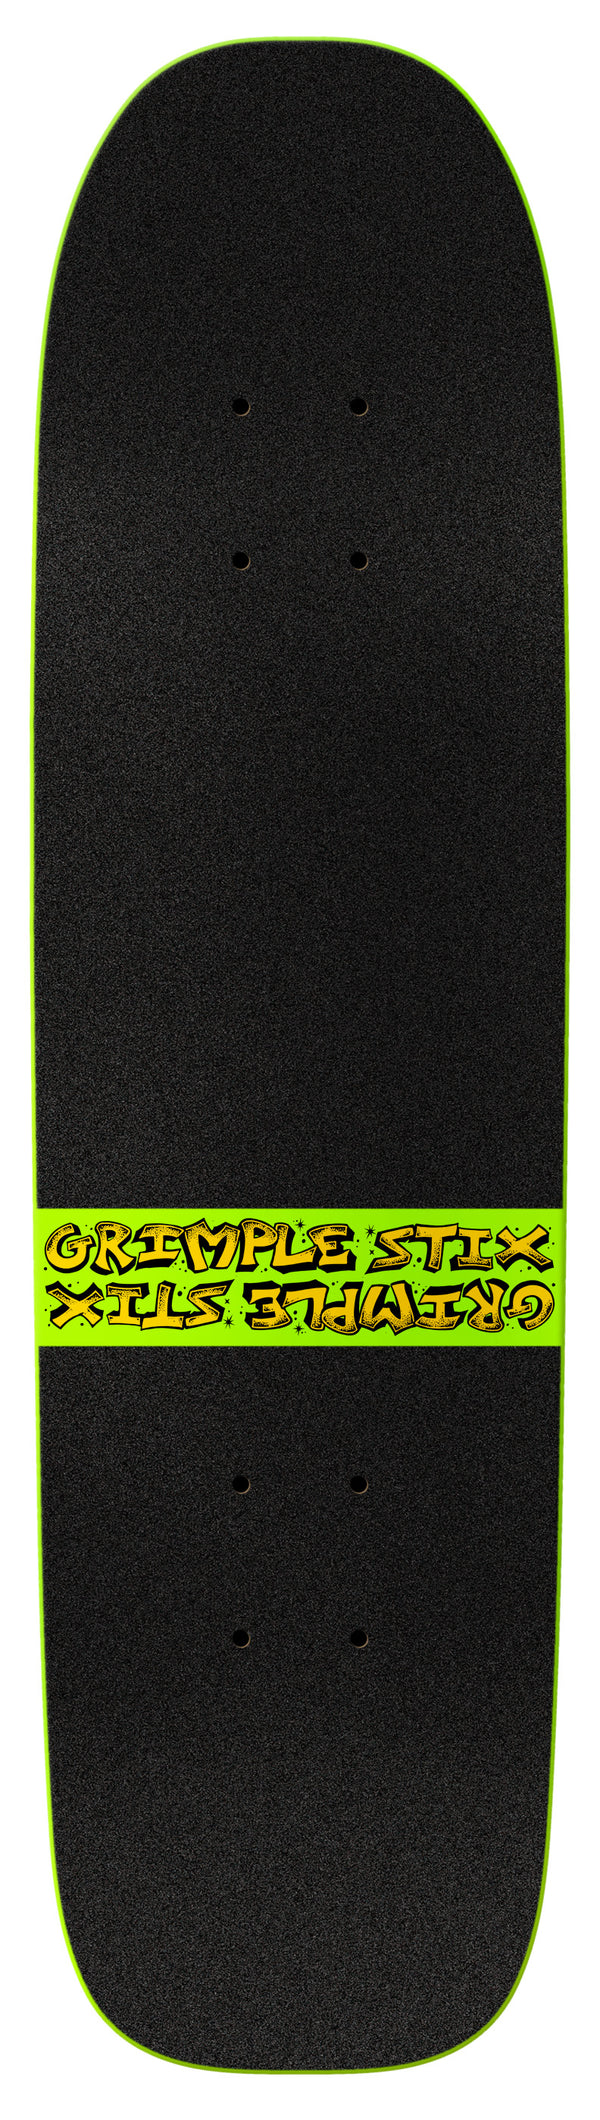 A black and green skateboard with an ANTIHERO GRIMPLE STIX SPACEWALKER COMPLETE logo on it.